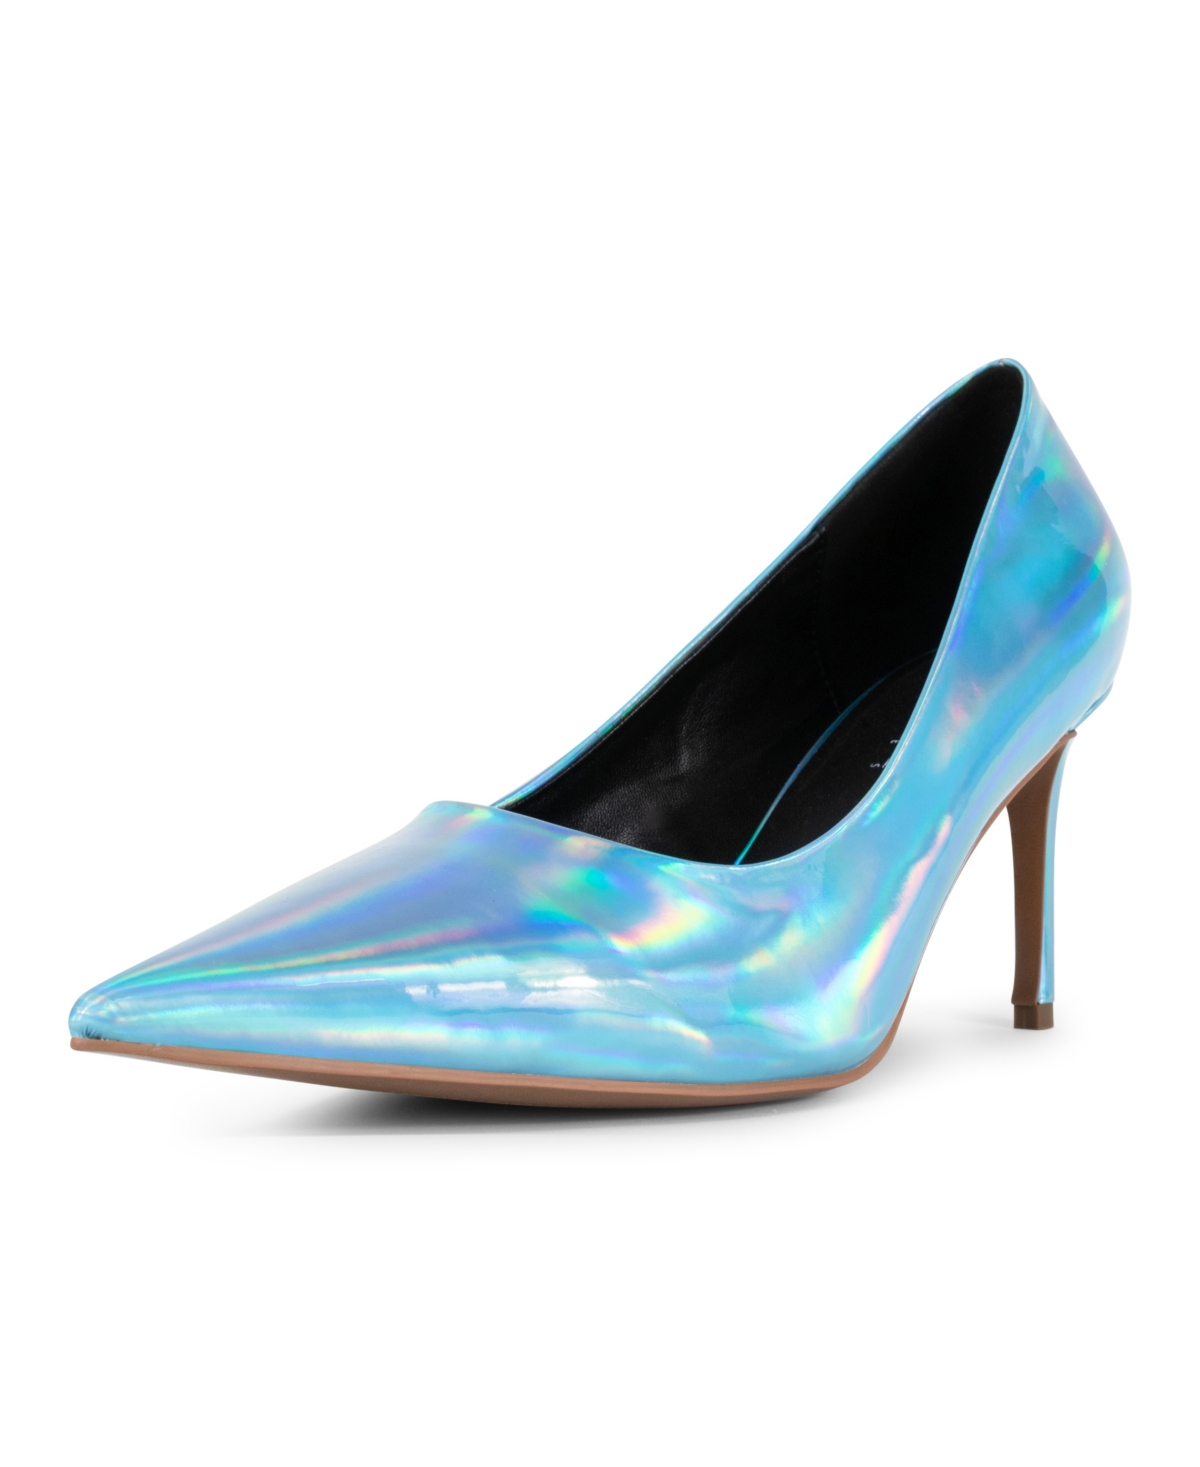 Smash Shoes Women's Sophia Pointed Toe Pumps In Blue